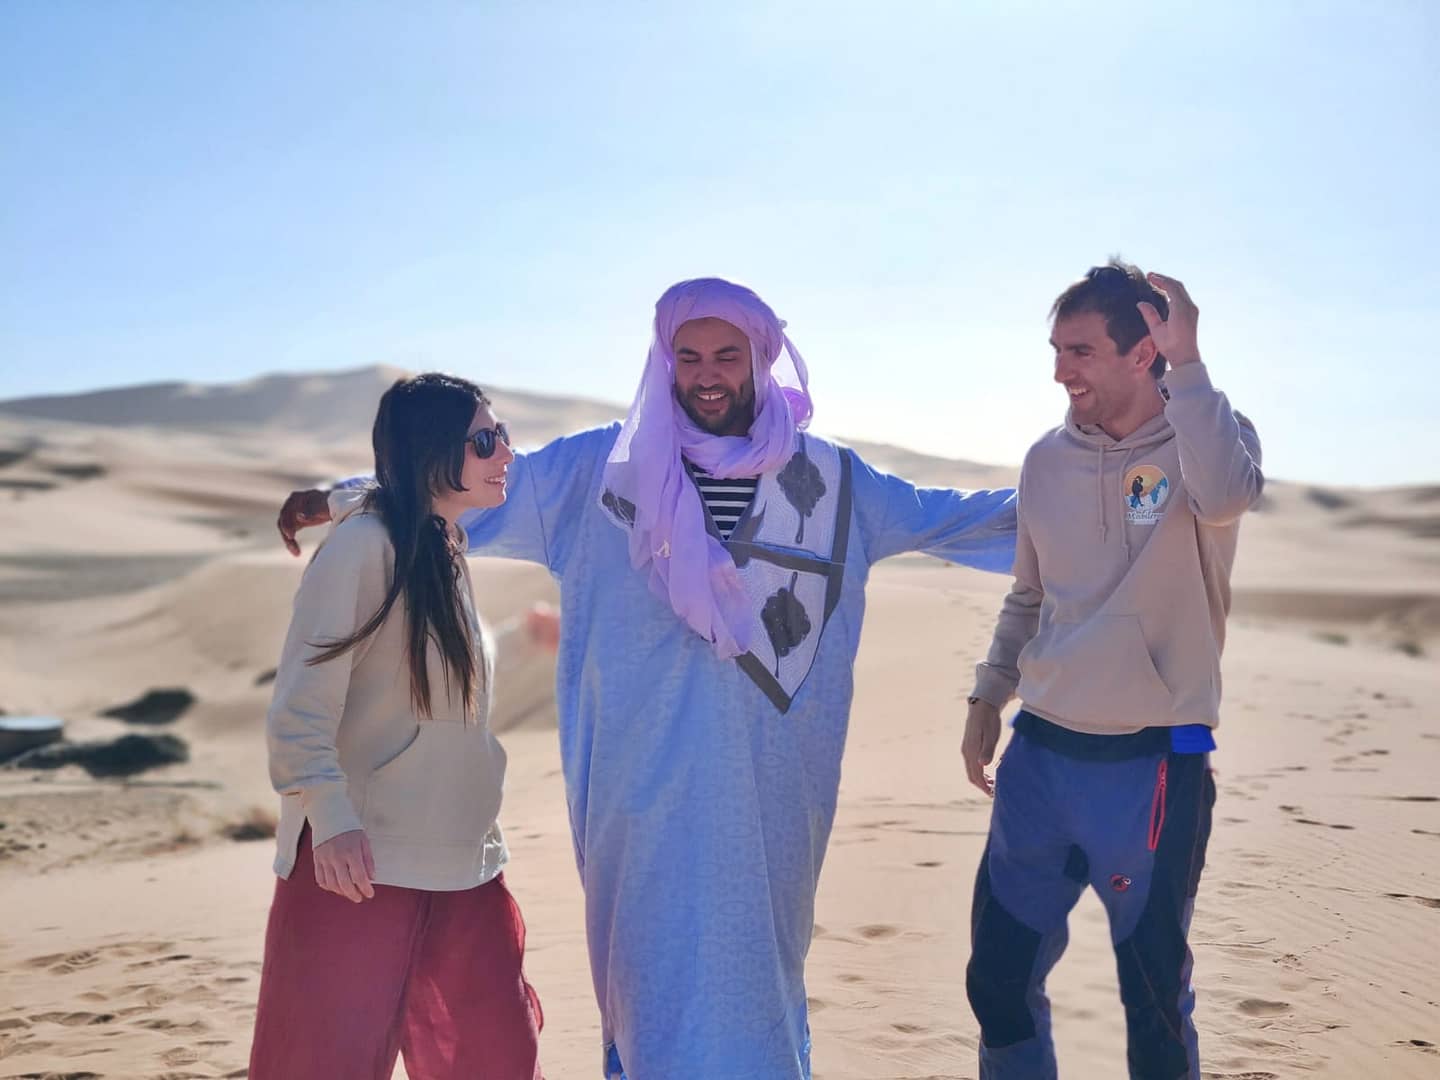 A cheerful trio walking together, with a man in traditional Moroccan attire between two tourists in the desert.